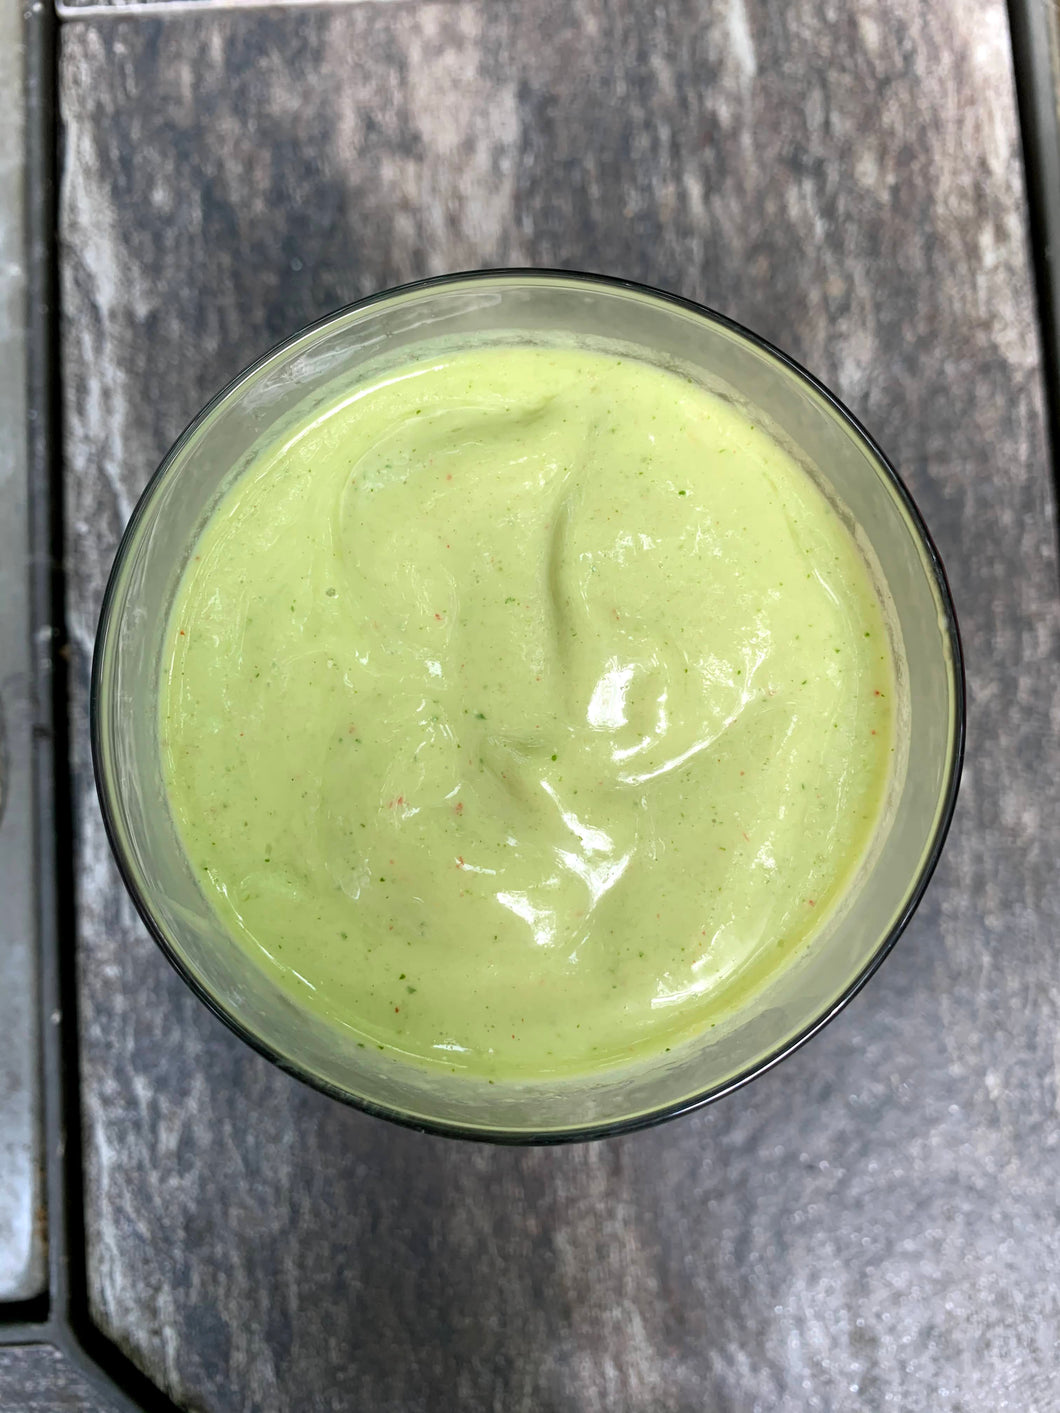 Green smoothie in a glass on a table.